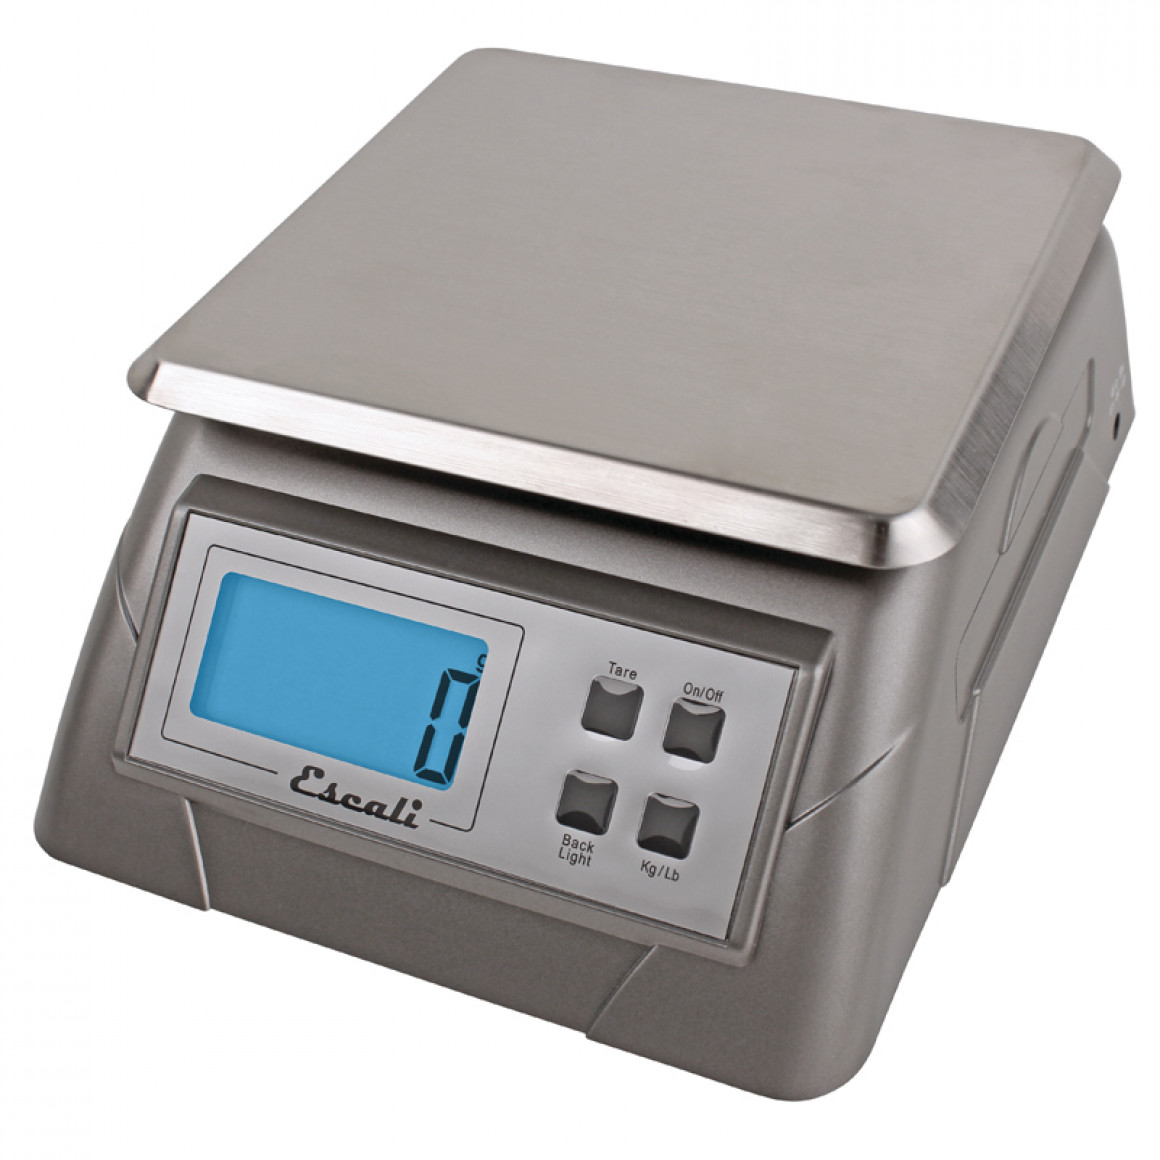 Large Square Digital Kitchen Scale, 13 Lb / 6 Kg (Optional power adapter sold separately)